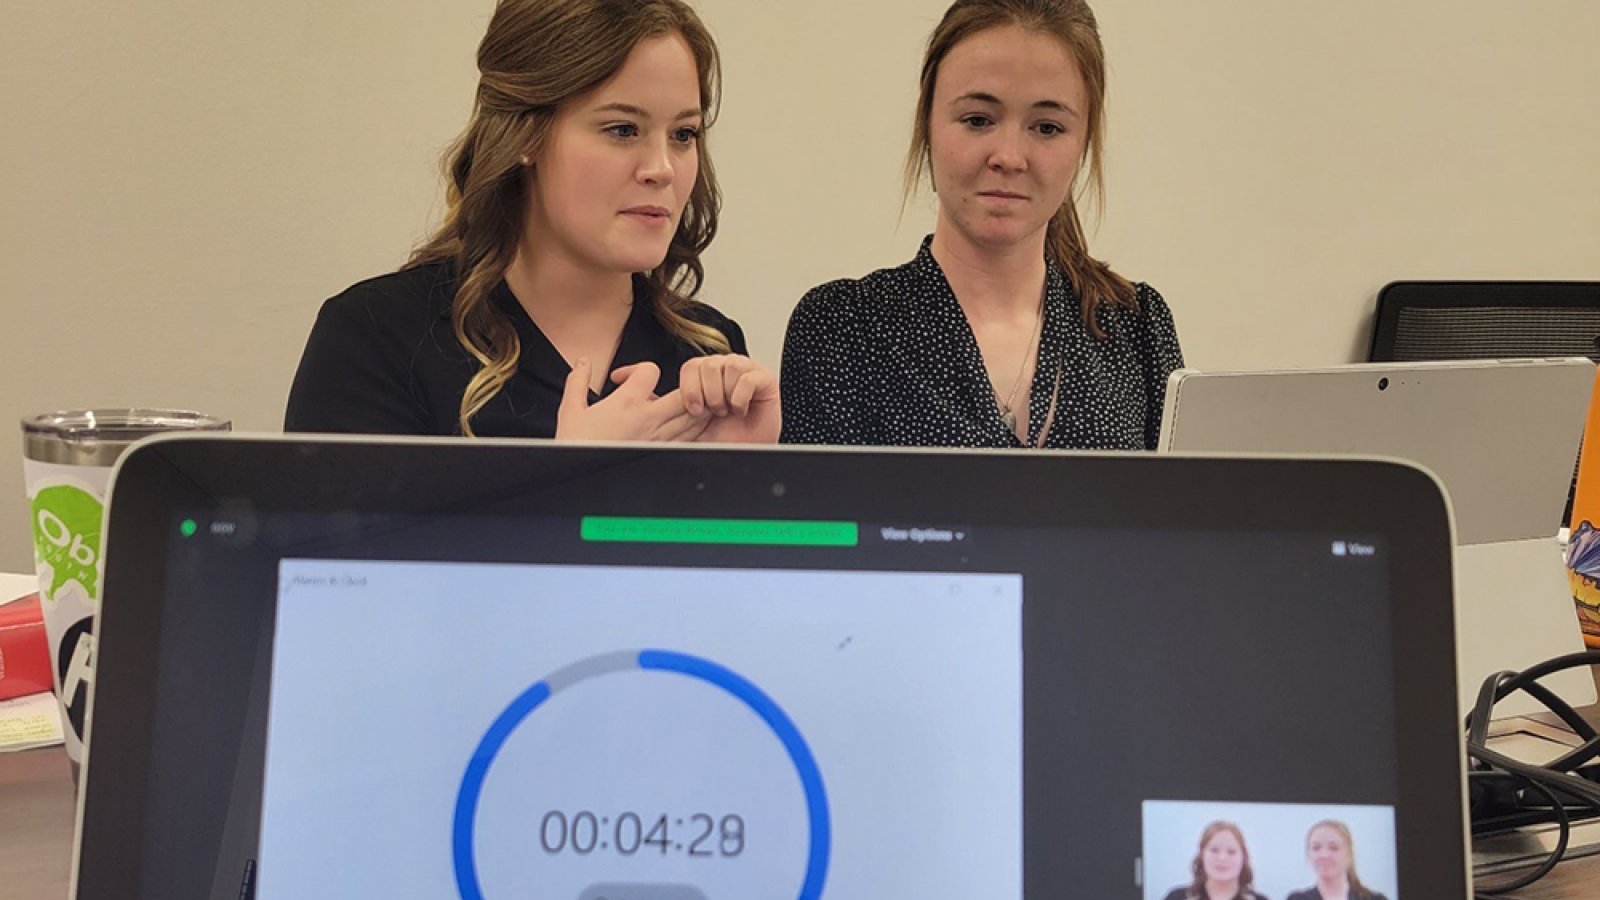 Cassie Perry (left), a junior chemical engineering major, and Mary Ankenbauer, a senior mechanical engineering major, teamed up to reach the semifinals of the Lockheed Martin Ethics in Engineering Case Competition, held virtually Feb. 28-March 1.